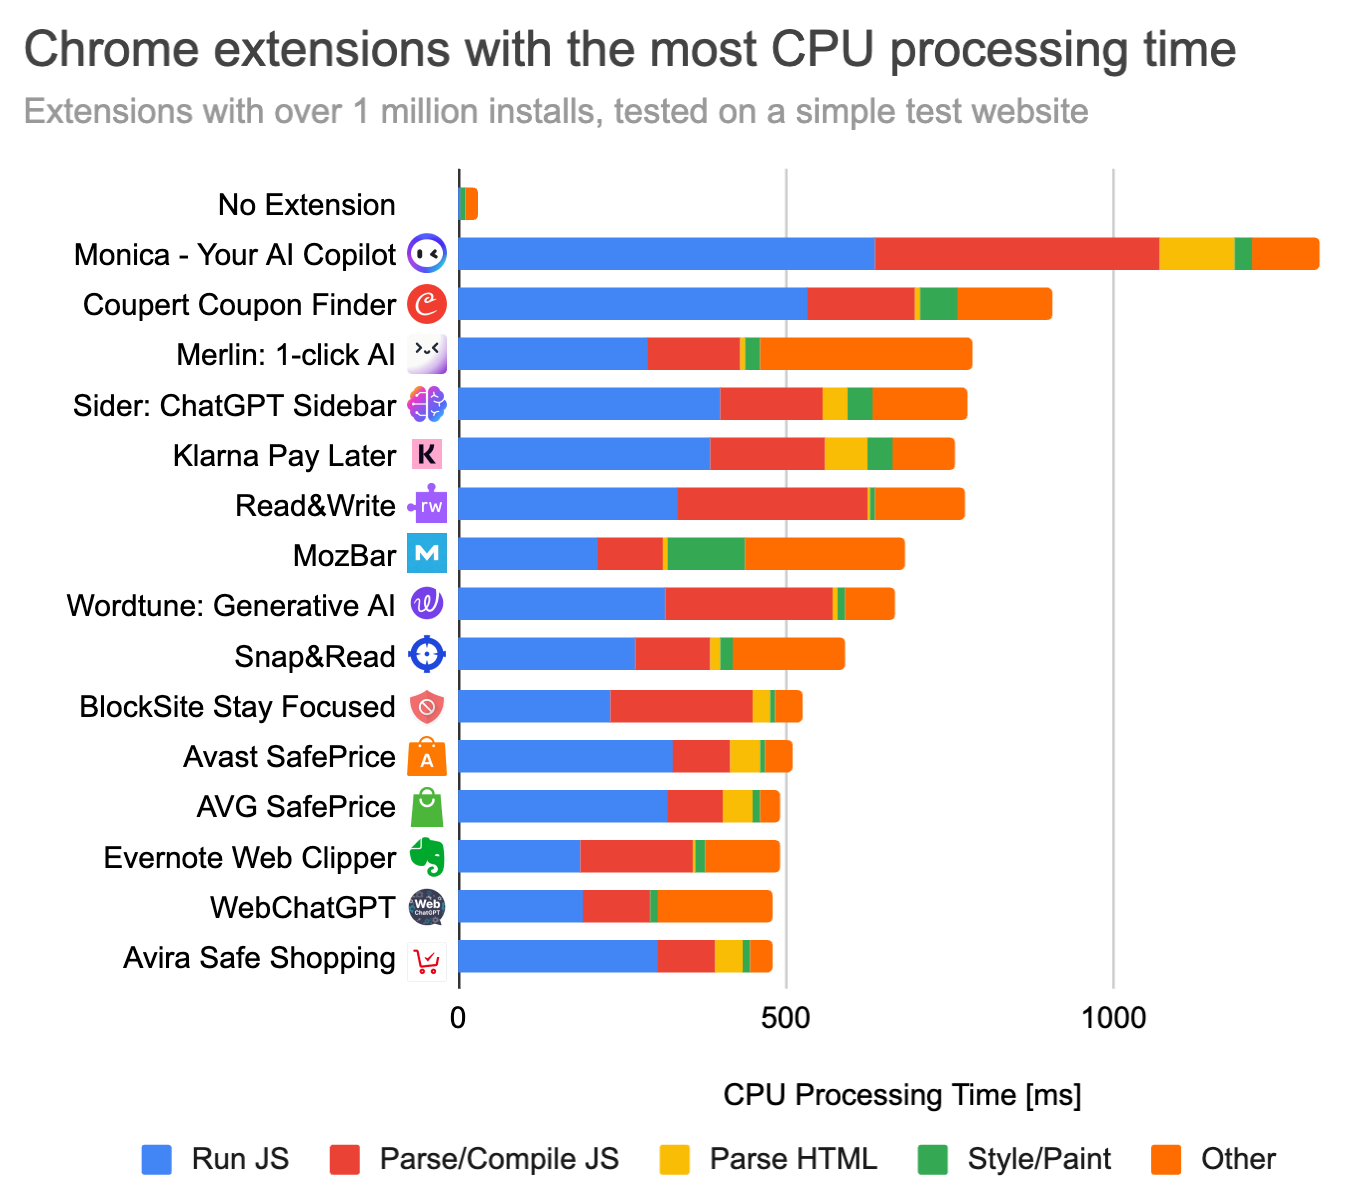 Chart showing Chrome extensions and CPU processing time on a test website